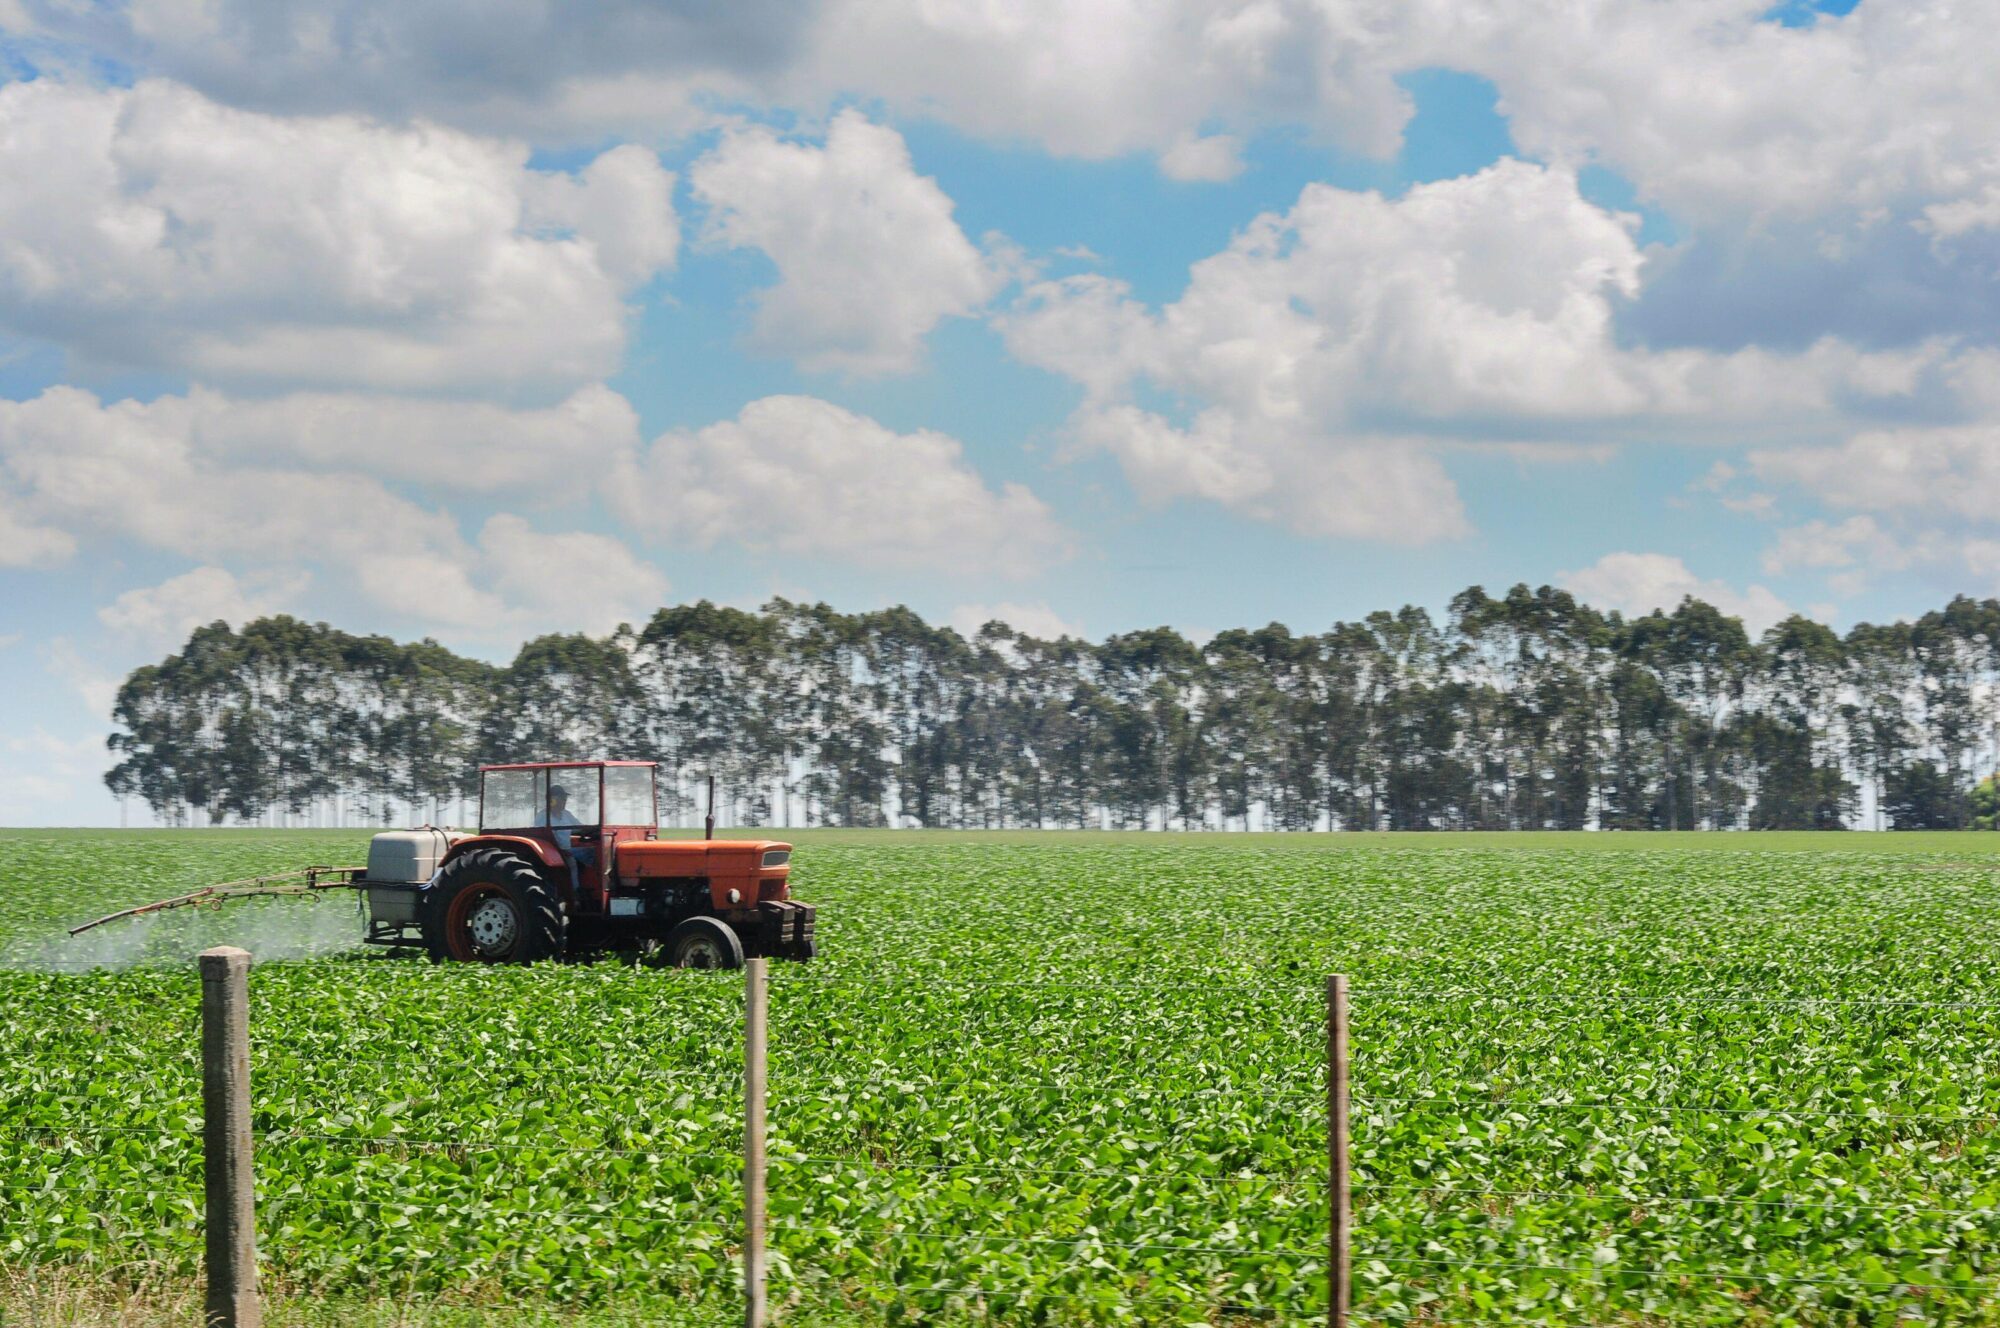 <p><span style="font-weight: 400;">A tractor sprays a soybean plantation in Uruguay. Chemical pesticides have long been the mainstream solution to pest control in agriculture, but now a growing number of organisations in the country are working on biological alternatives. (Image: Picardo Photography / Alamy)</span></p>